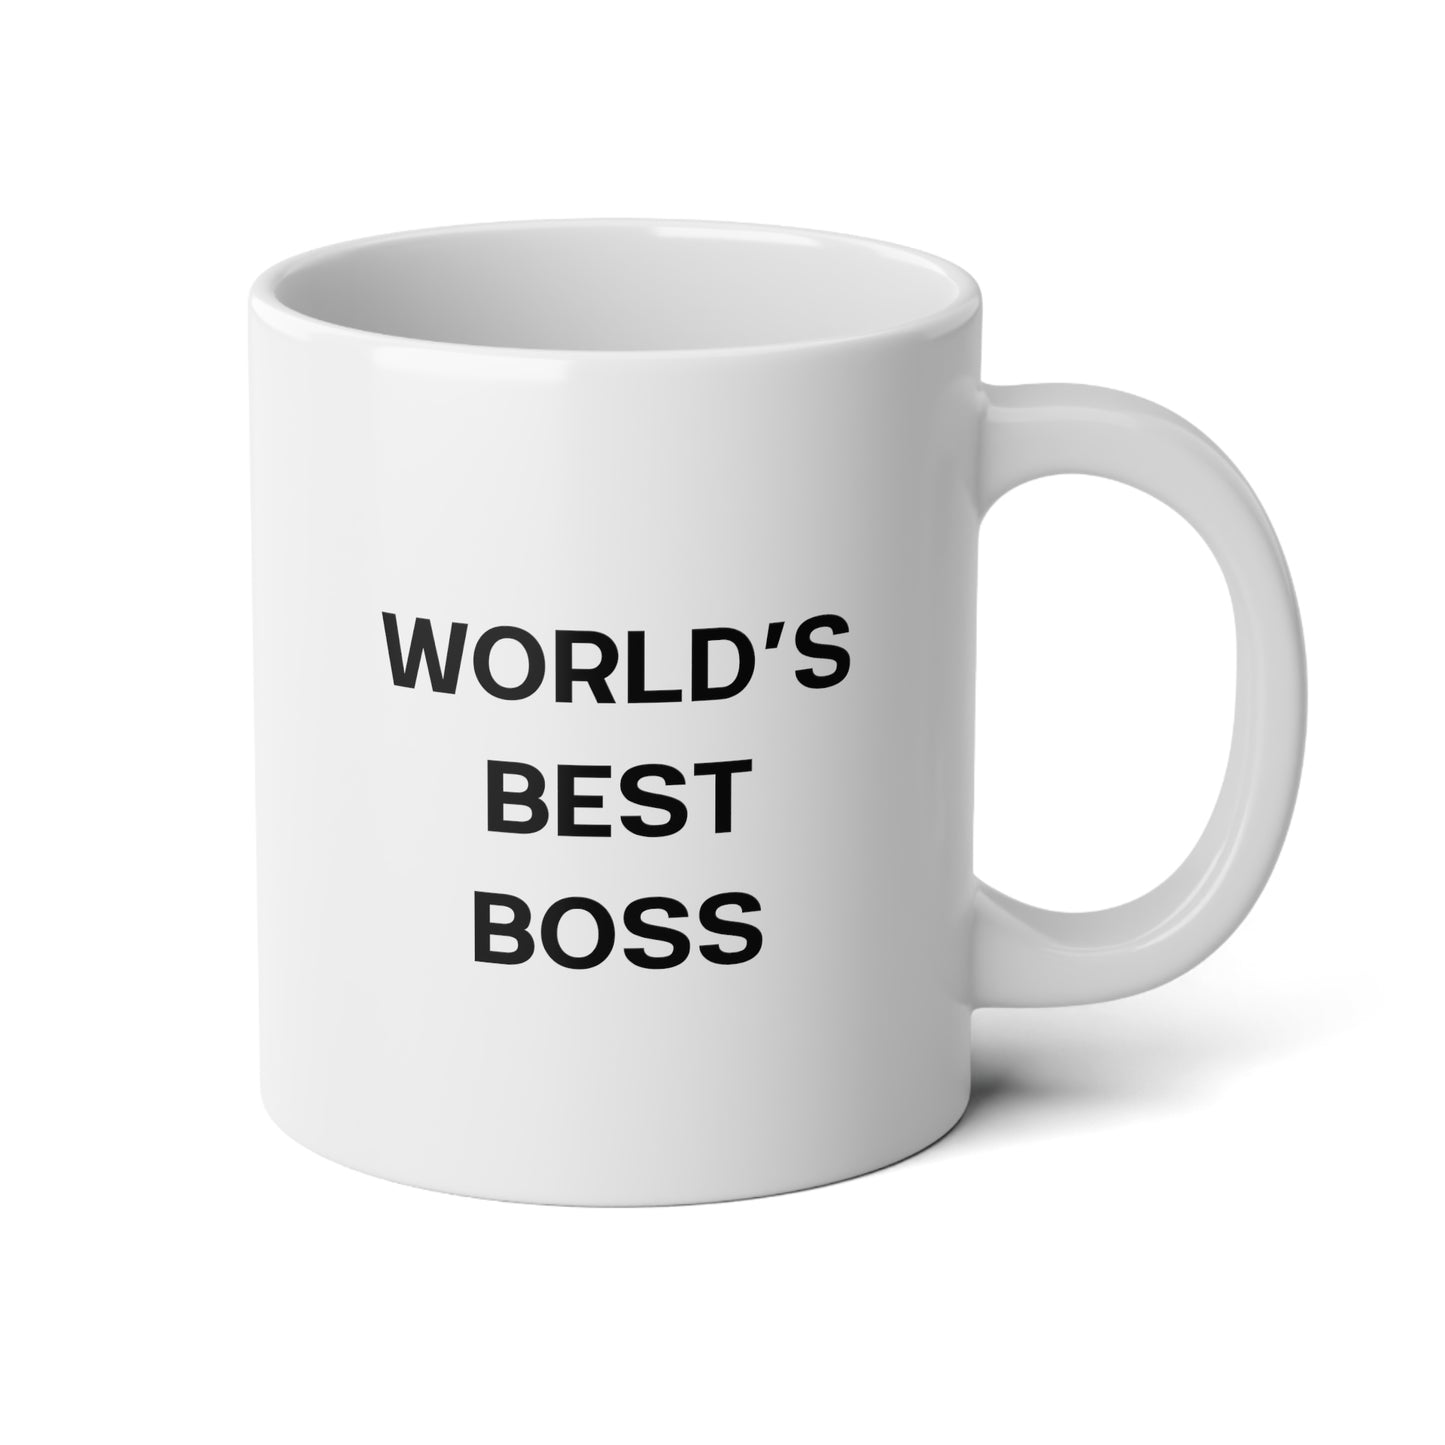 World's Best Boss 20oz white funny large coffee mug gift for coworker team leader manager office waveywares wavey wares wavywares wavy wares